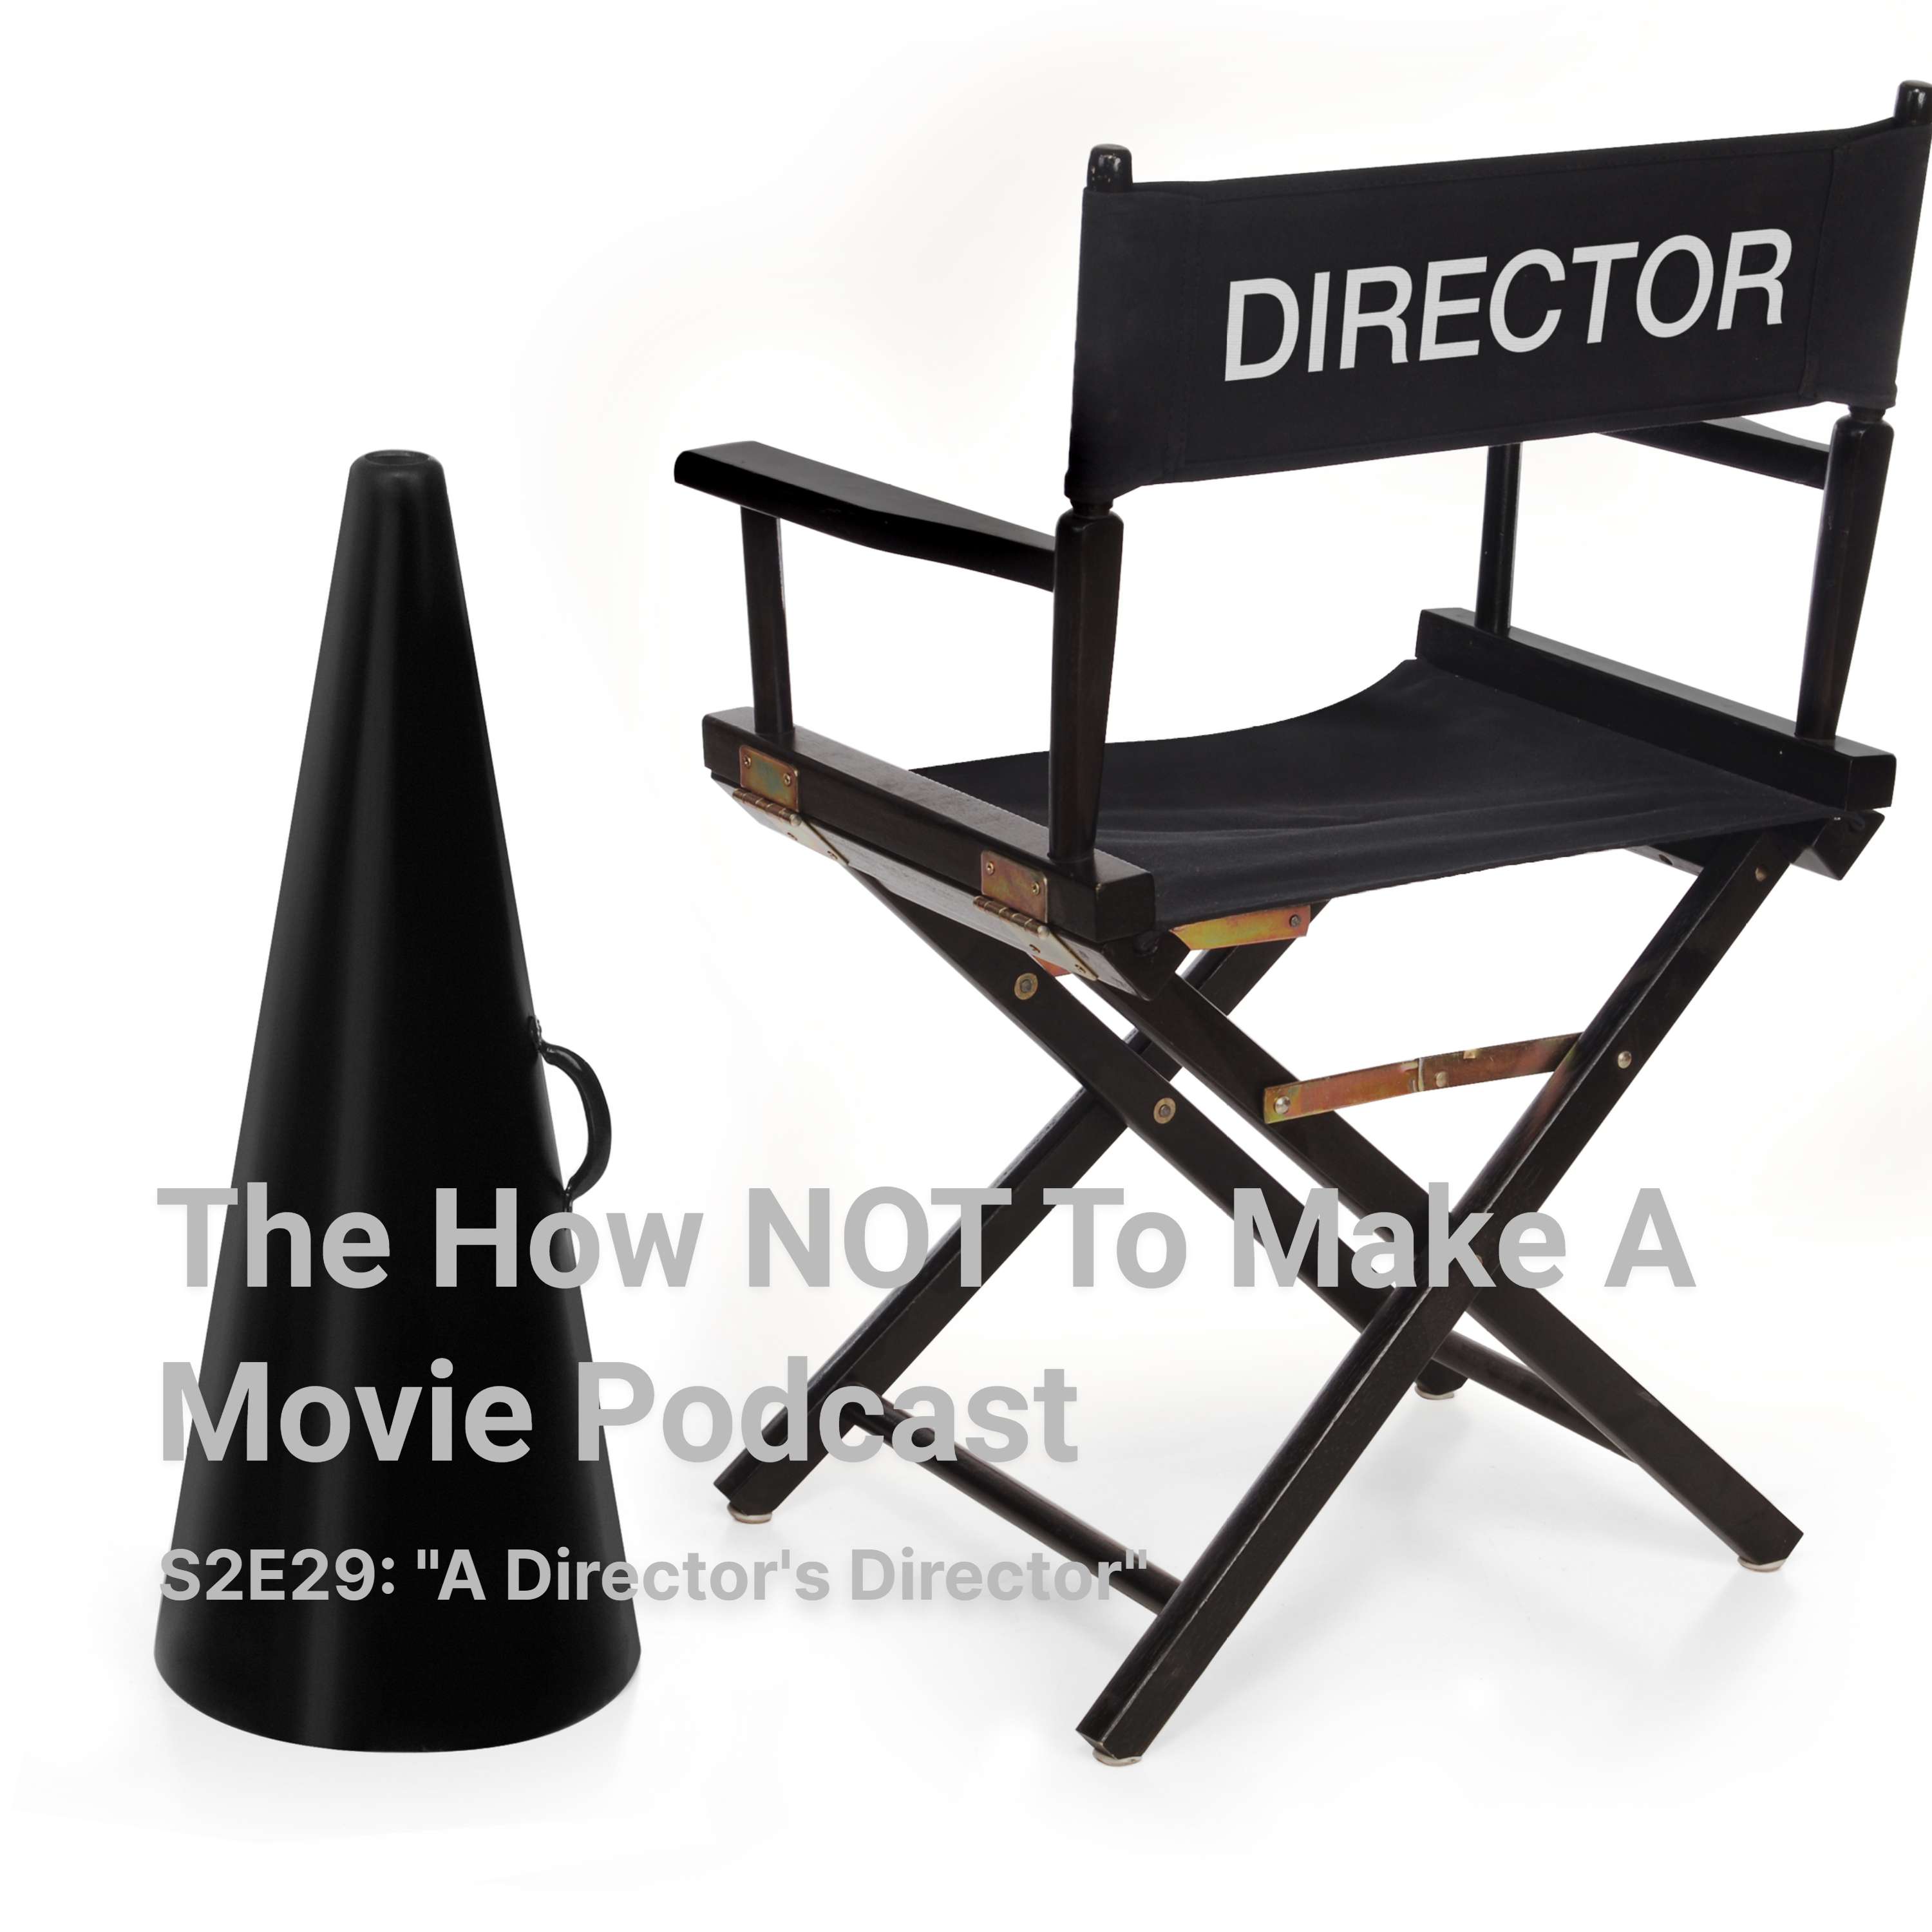 S2E29: "The Director's Director"